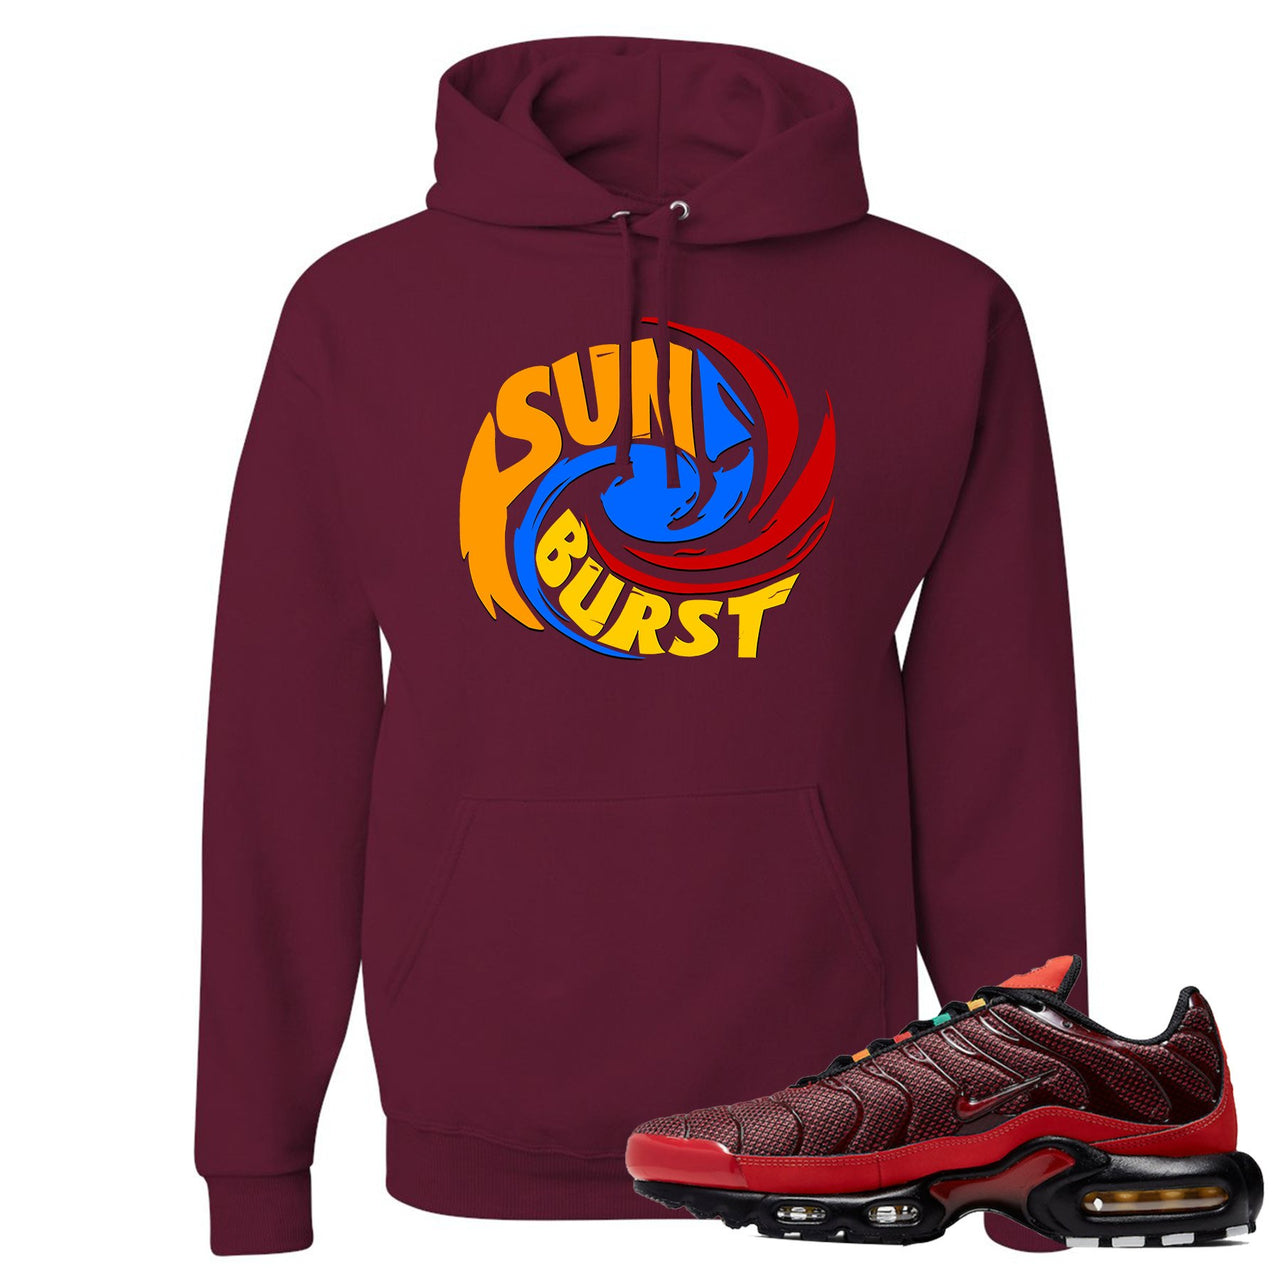 printed on the front of the air max plus sunburst sneaker matching maroon pullover hoodie is the sunburst hurricane logo